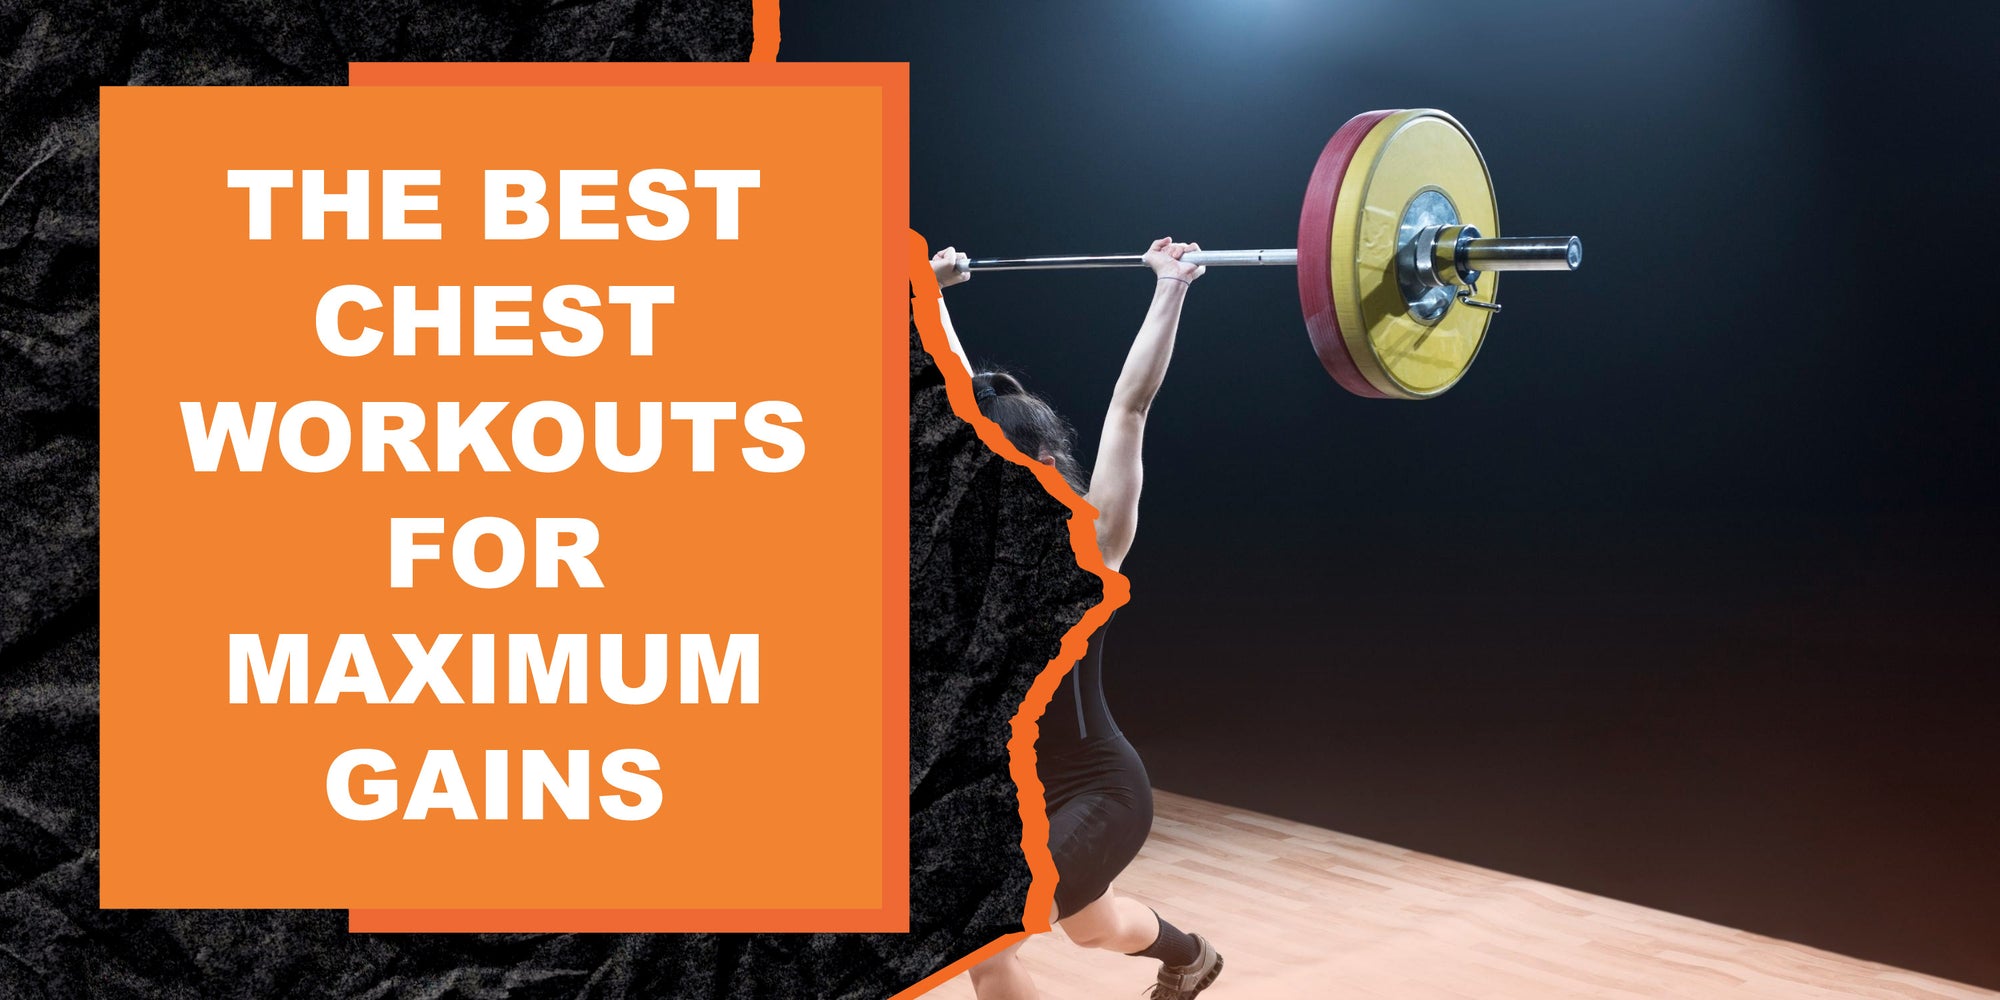 The Best Chest Workouts for Maximum Gains